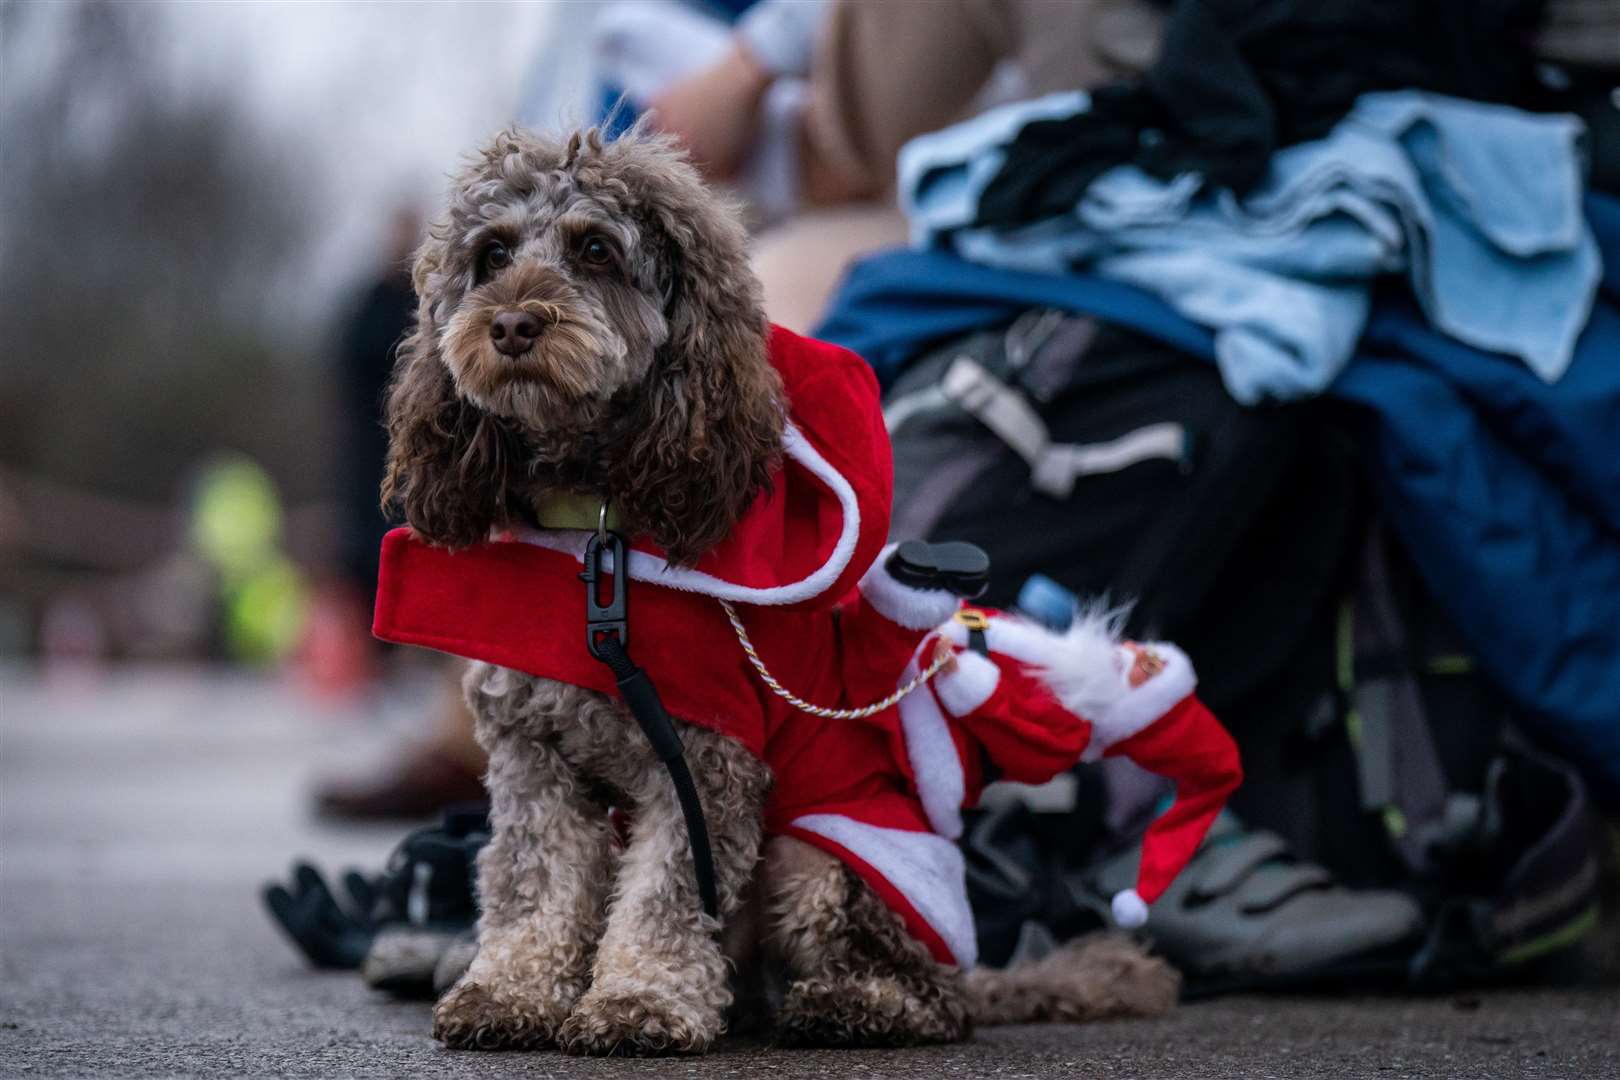 Not everyone was keen on taking a watery dip, with this dog content to watch in his Santa suit (Aaron Chown/PA)